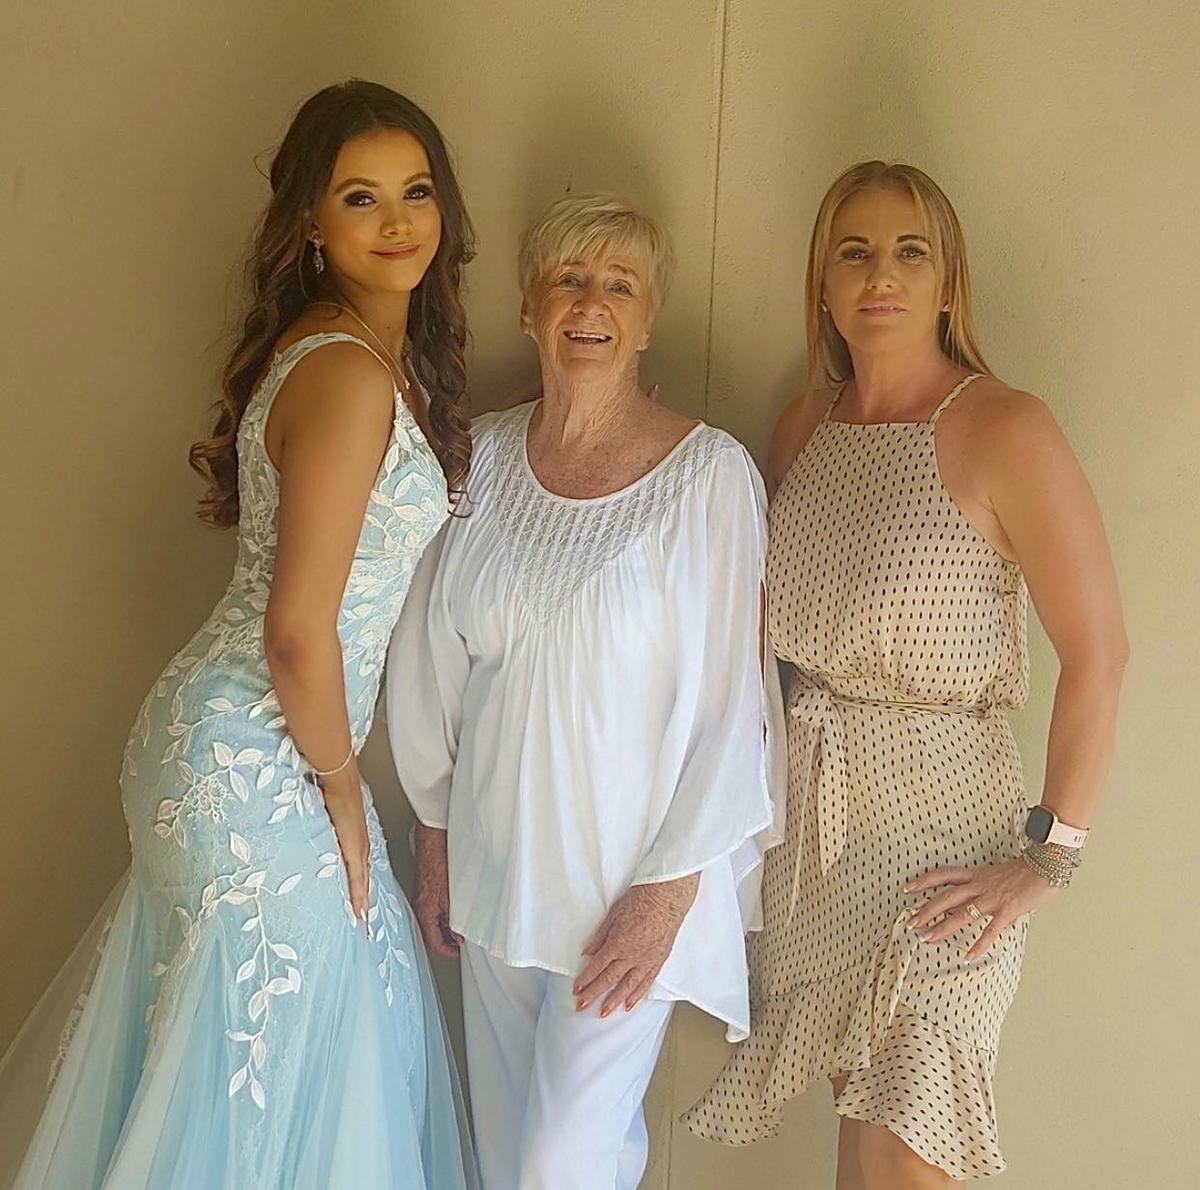 Tia (L) with her grandma Jacqueline and mom, Samantha. (Courtesy of Tia Schwind)